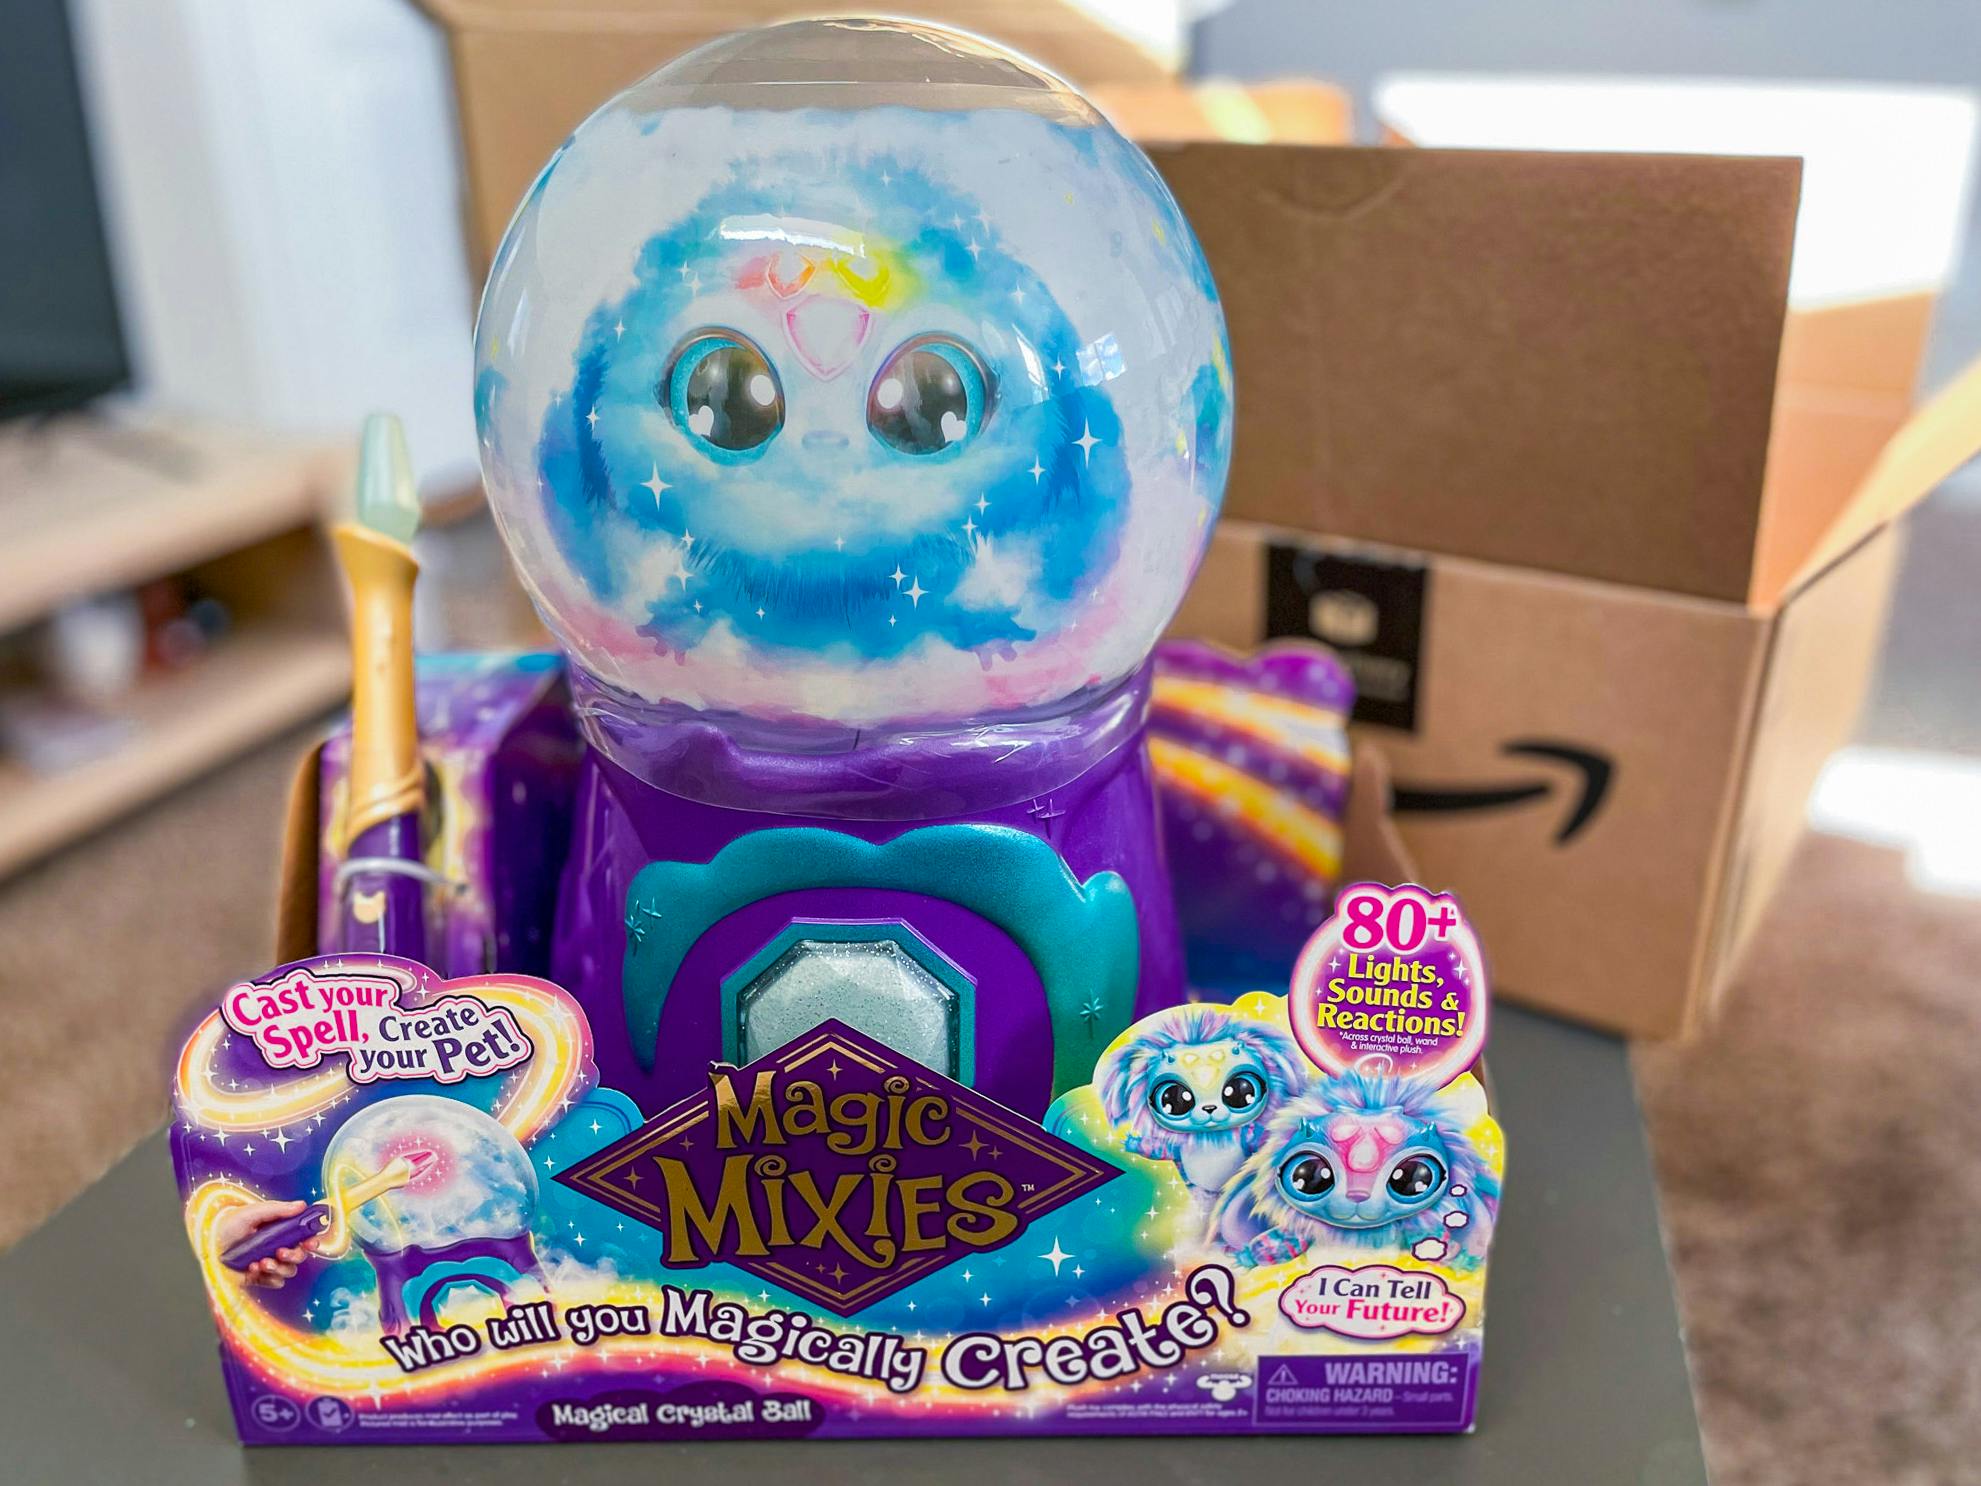 Magic Mixies Magical Mist Refill Pack – Magical Crystal Ball - Moose Toys